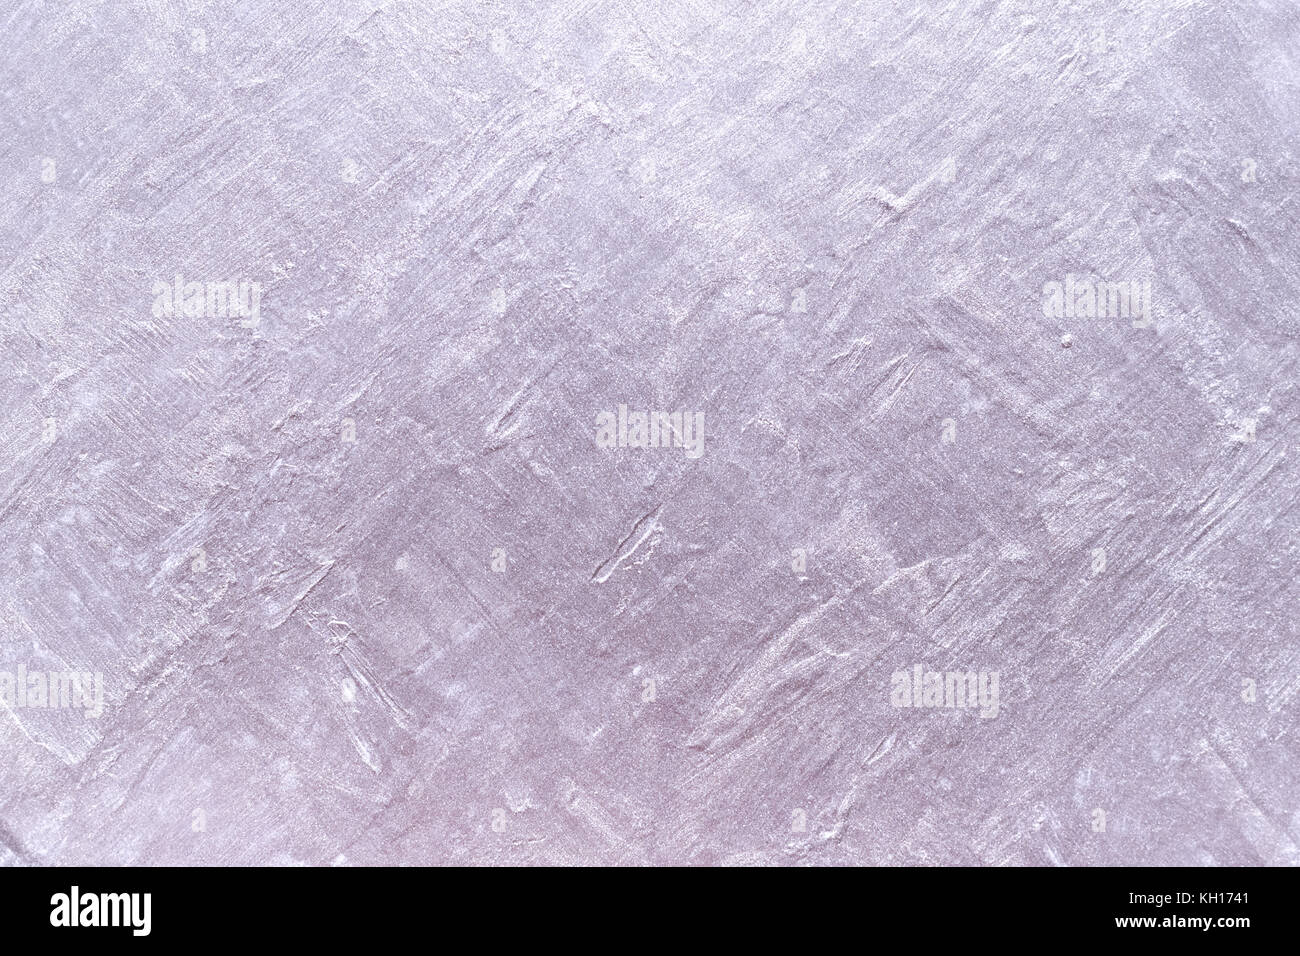 Purple textures background close up Stock Photo